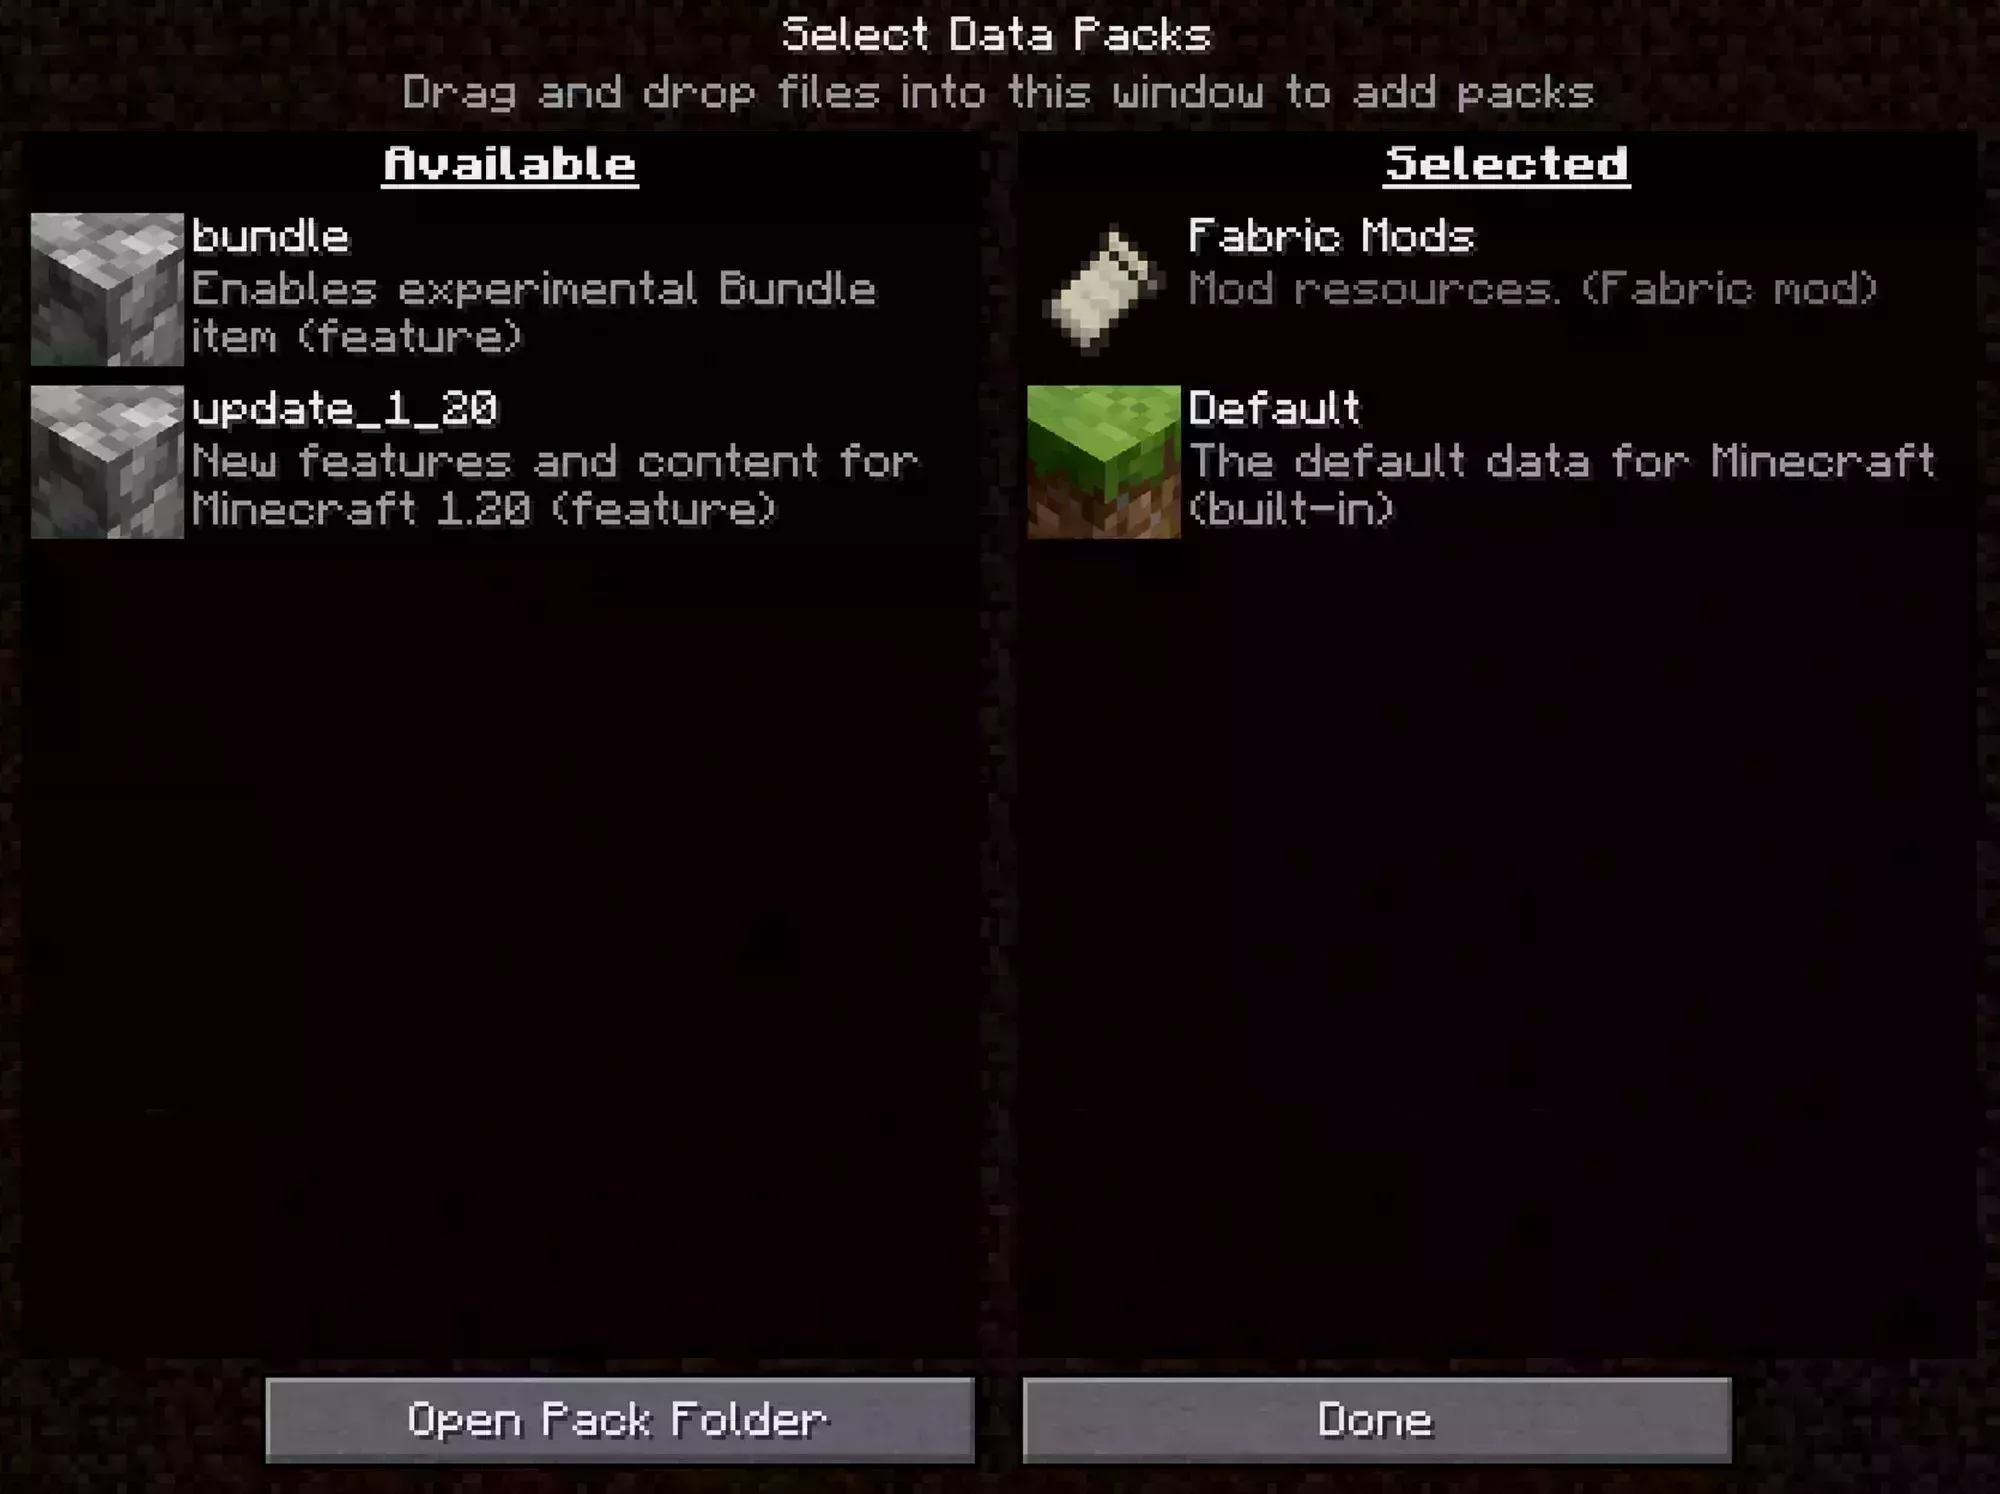 The Minecraft Select Data Packs screen